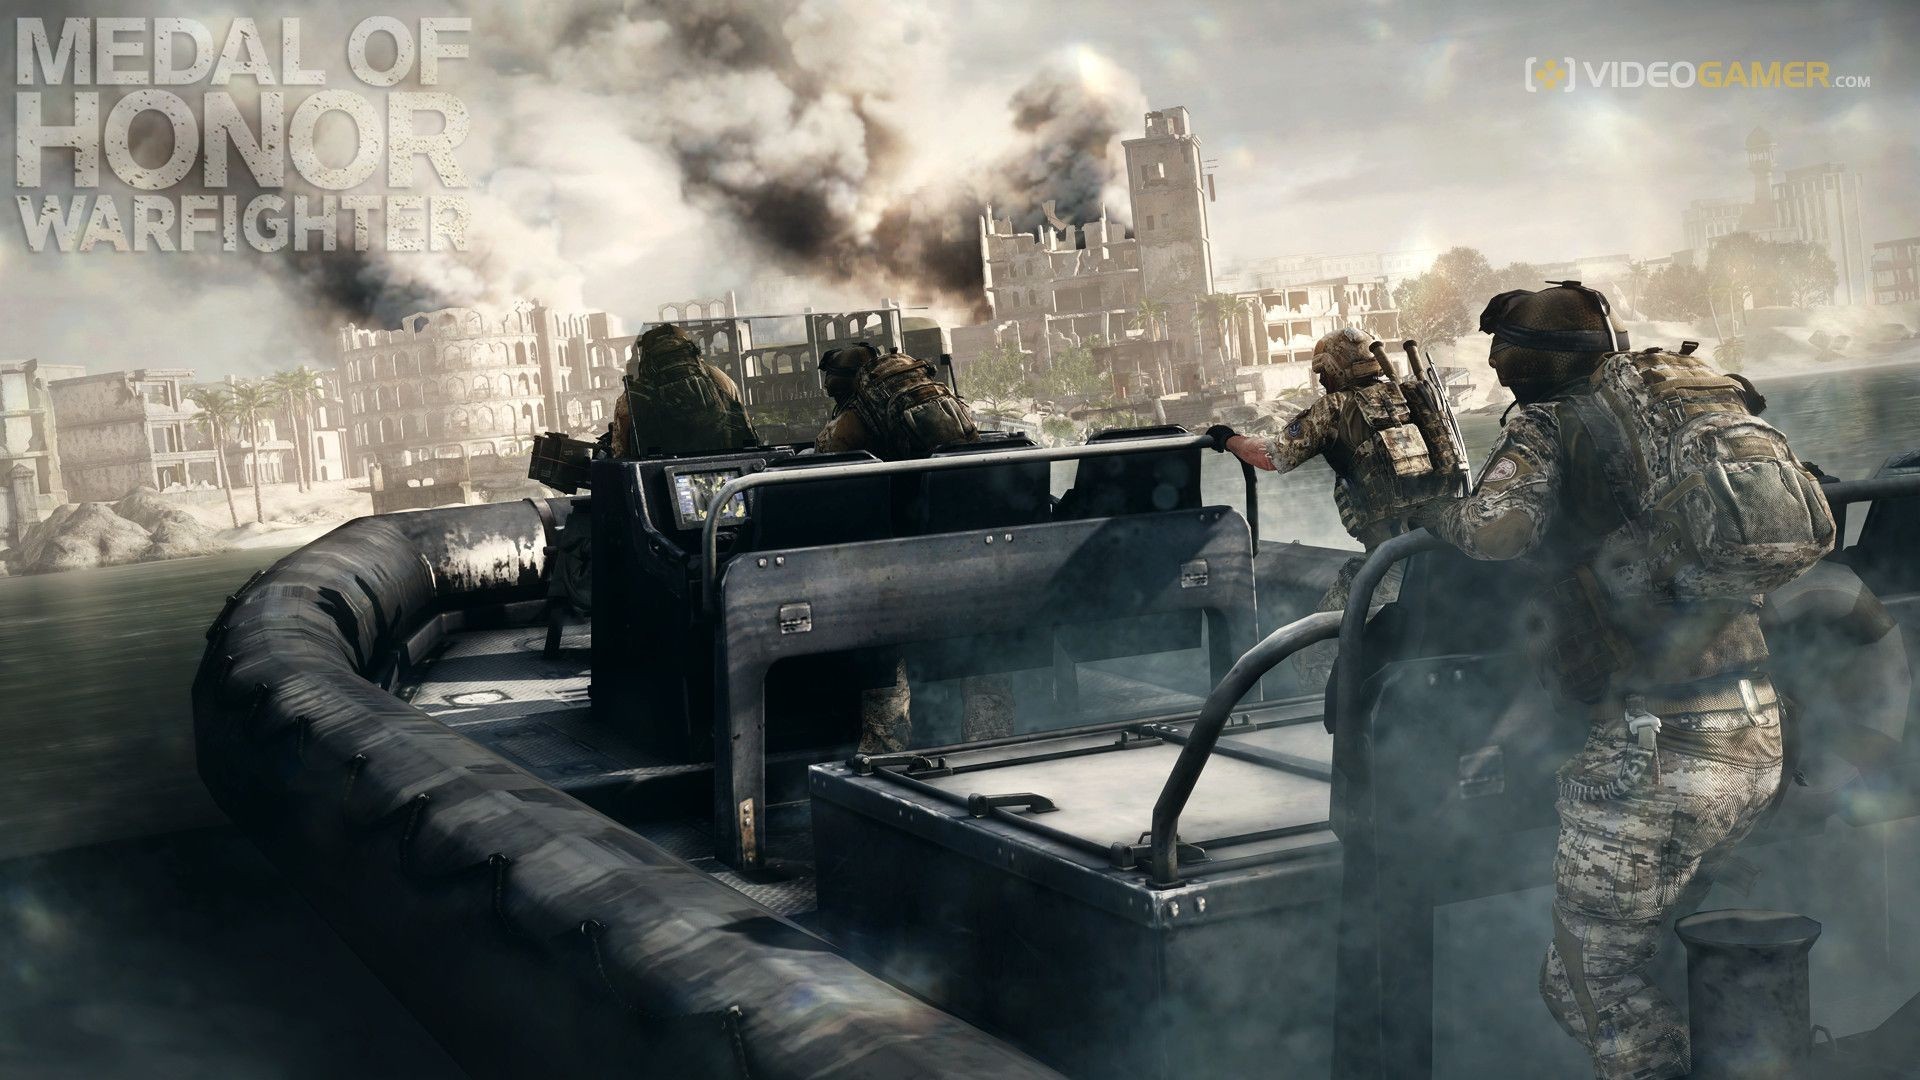 1920x1080 Medal of Honor Warfighter Wallpaper wallpapers